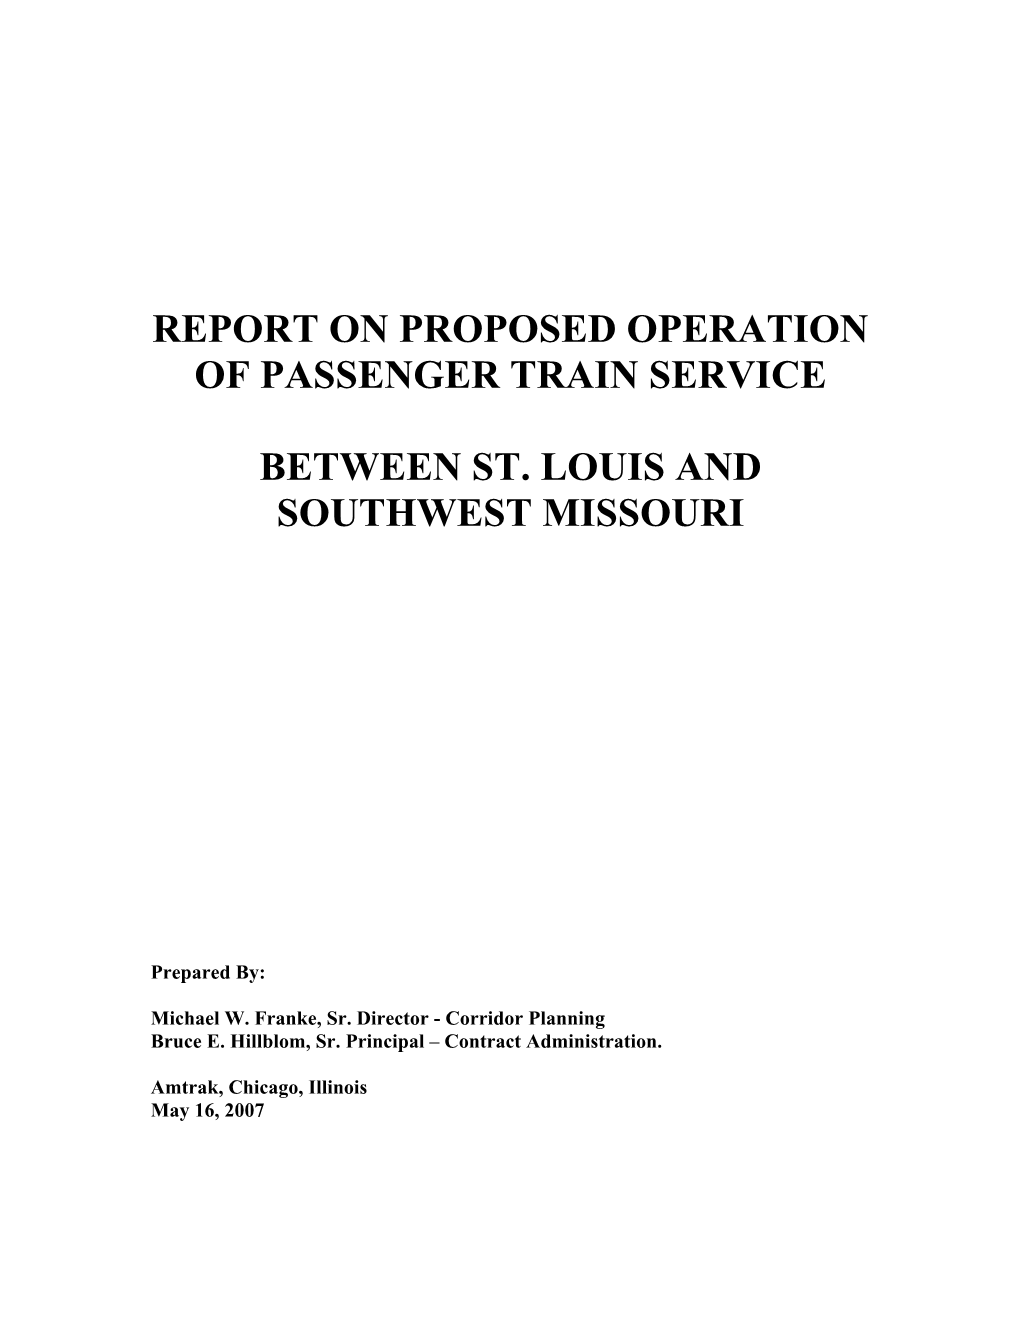 Report on Proposed Operation of Passenger Train Service Between St